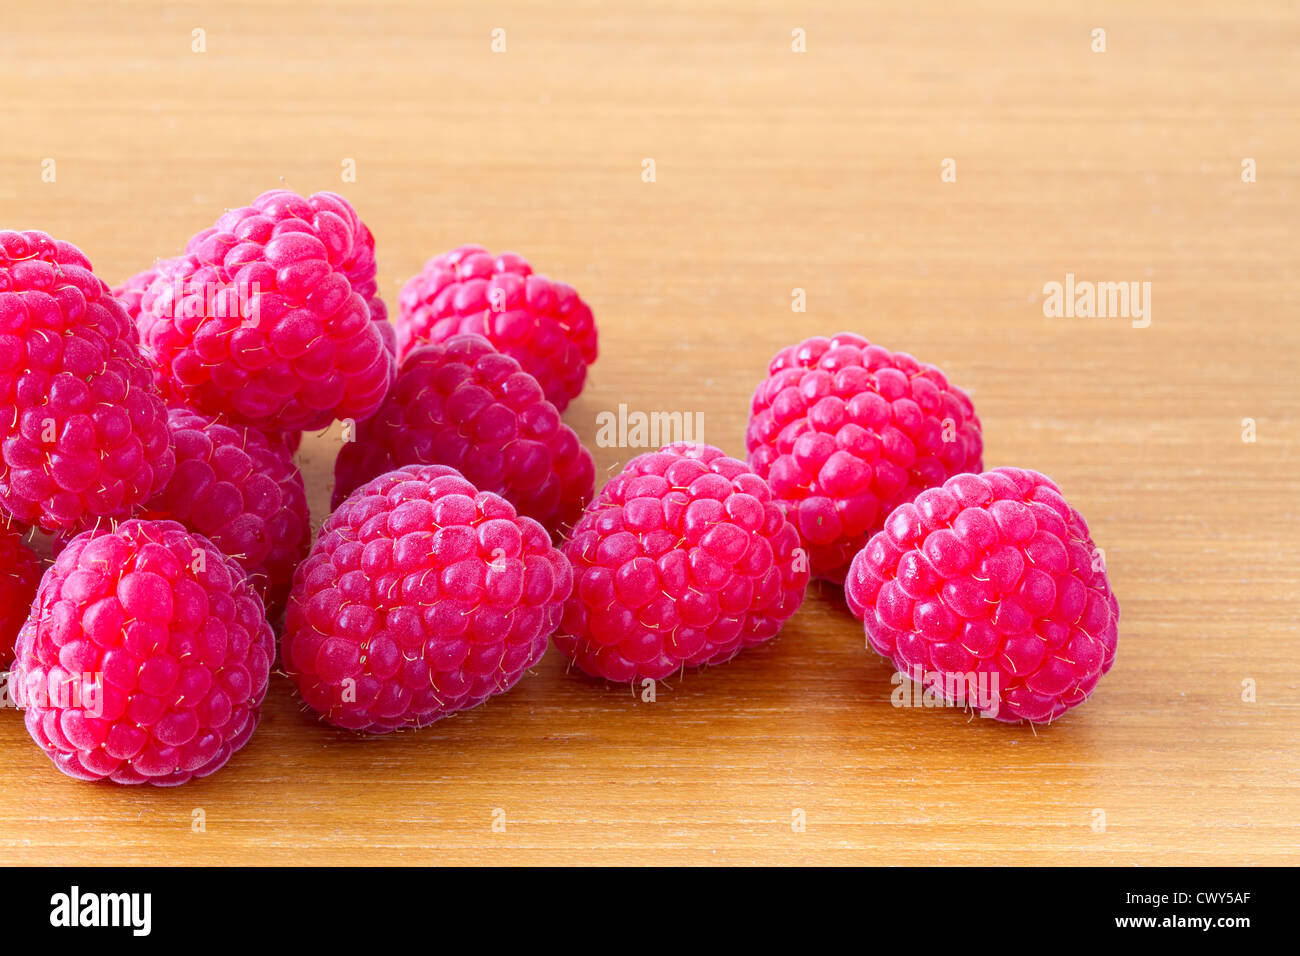 Heap of red ripe raspberries on wooden table Stock Photo